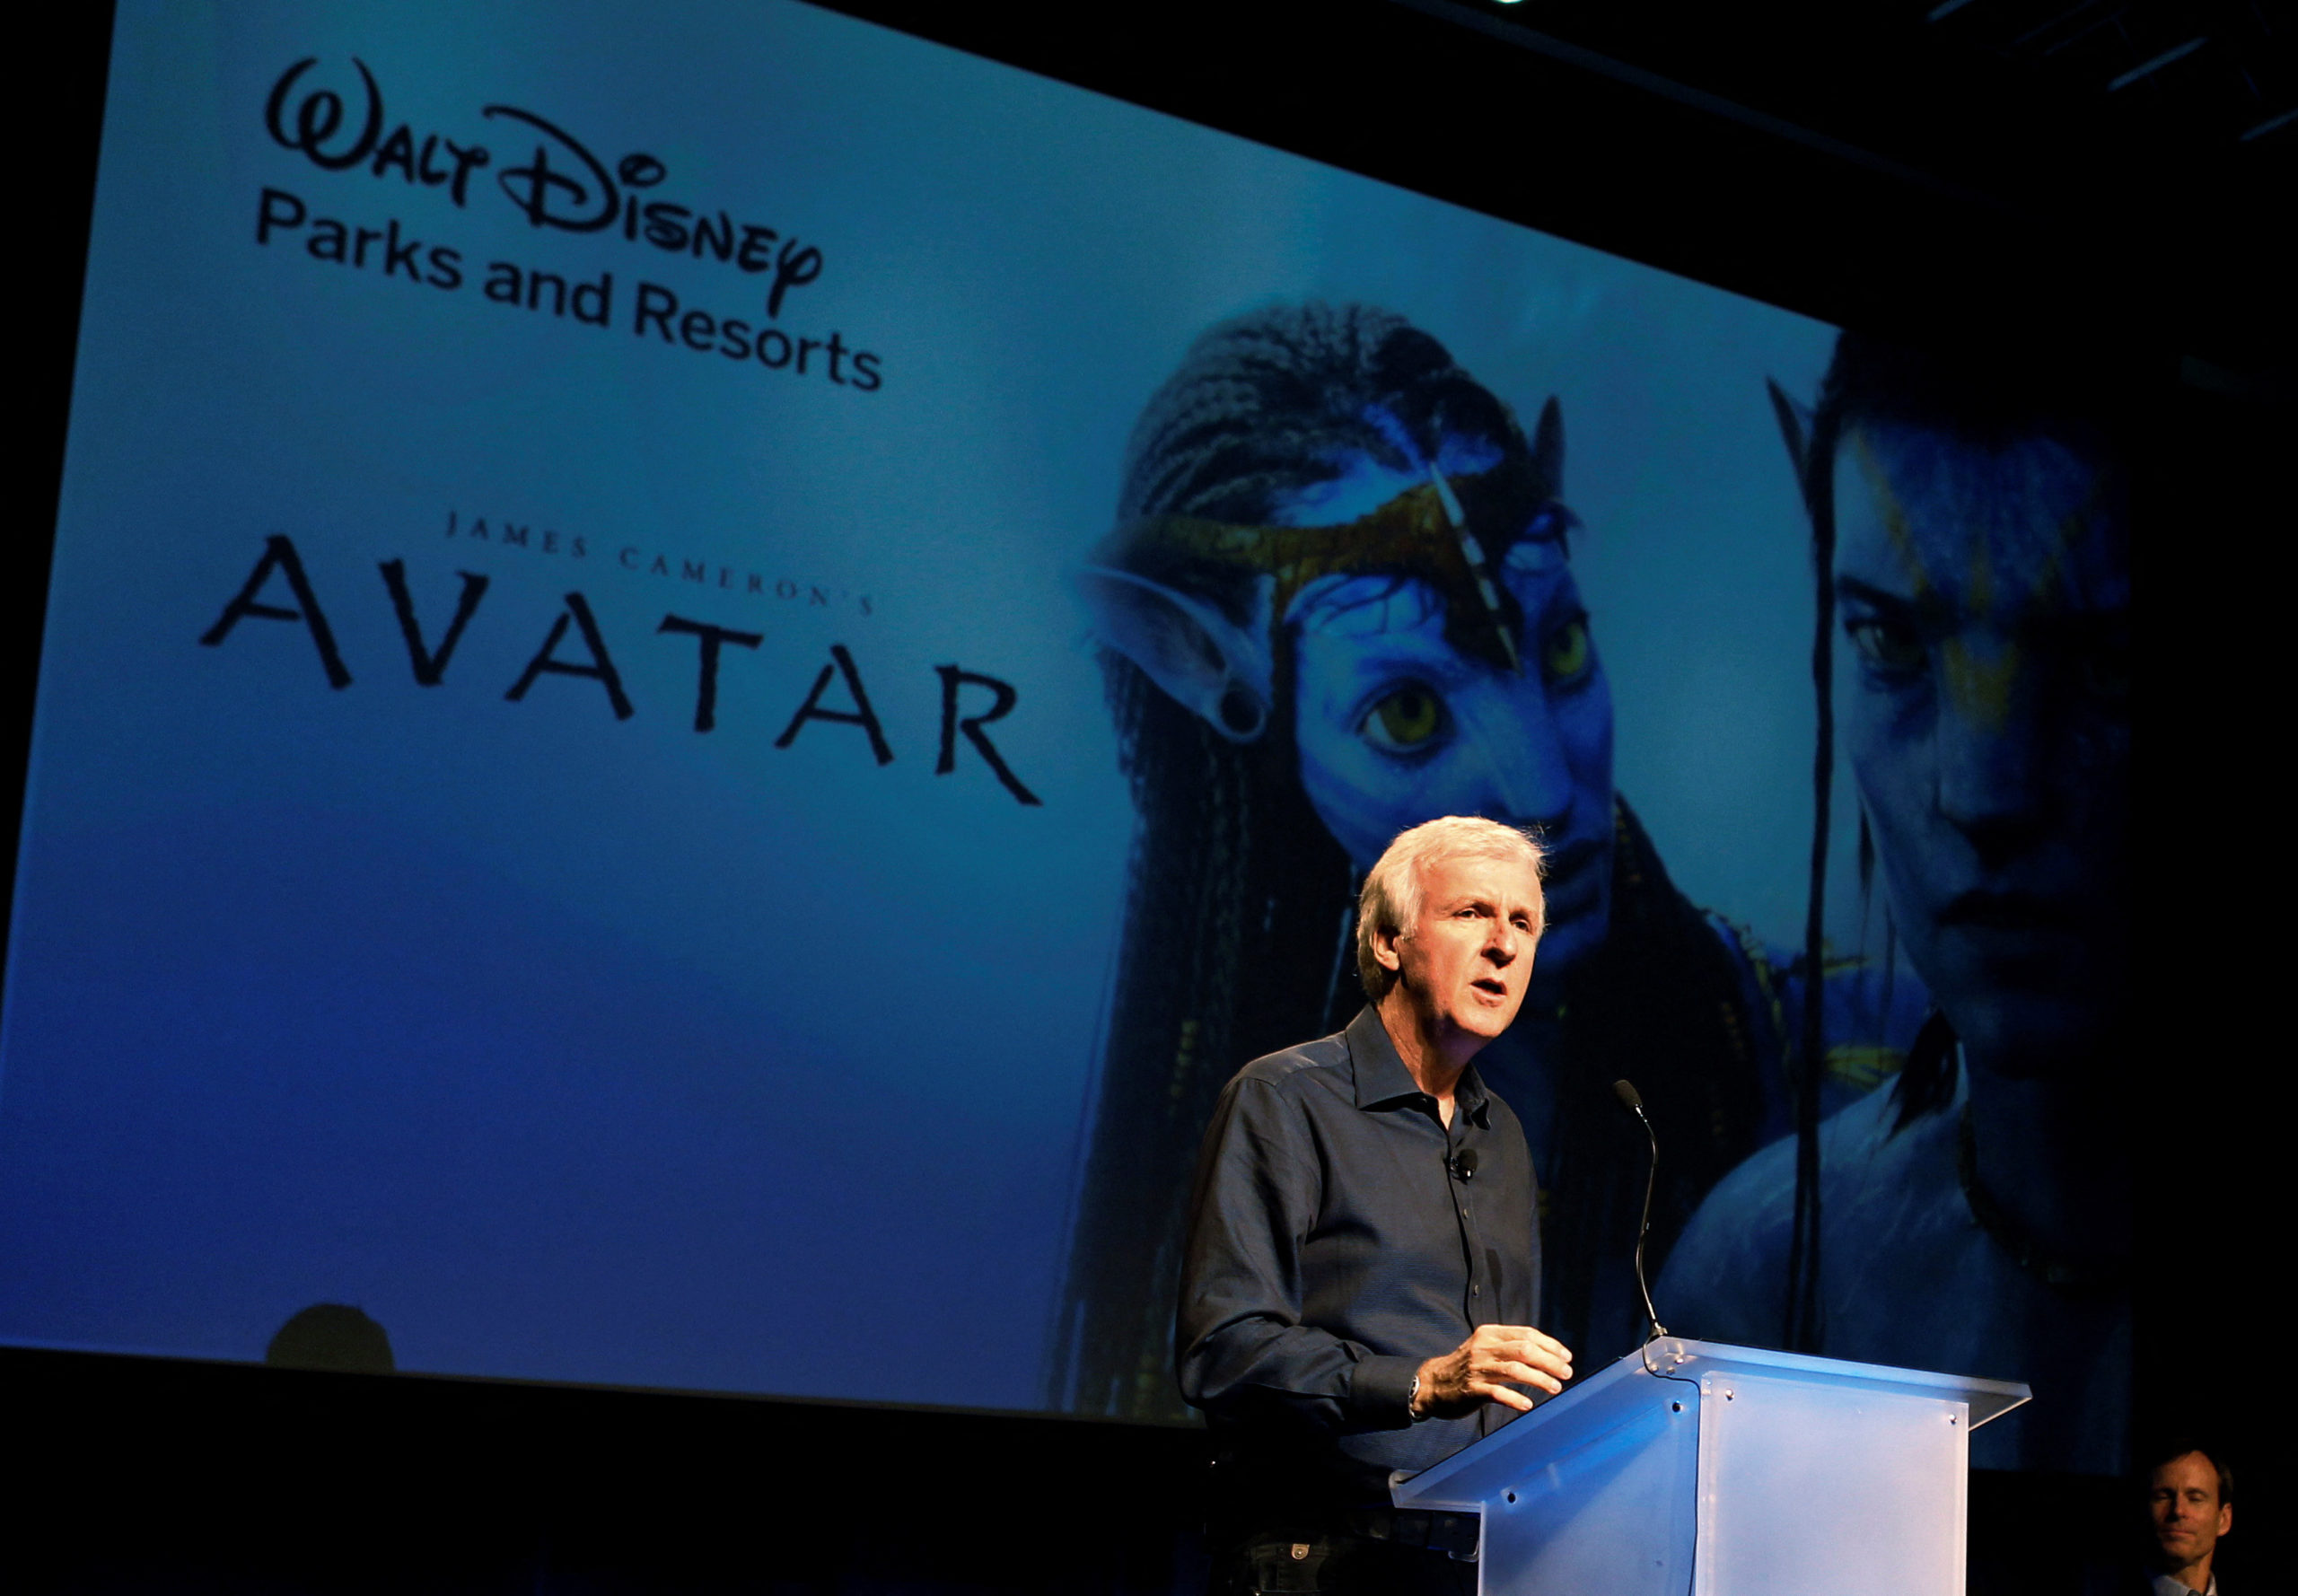 Director James Cameron announce a long-term agreement which will bring "Avatar" themed lands to Disney parks with the the first at Walt Disney World in Orlando, Florida, as he speaks at a media briefing in Glendale, Calfornia September 20, 2011. A scene from "Avatar" is shown on screen background.  REUTERS/Fred Prouser/File Photo